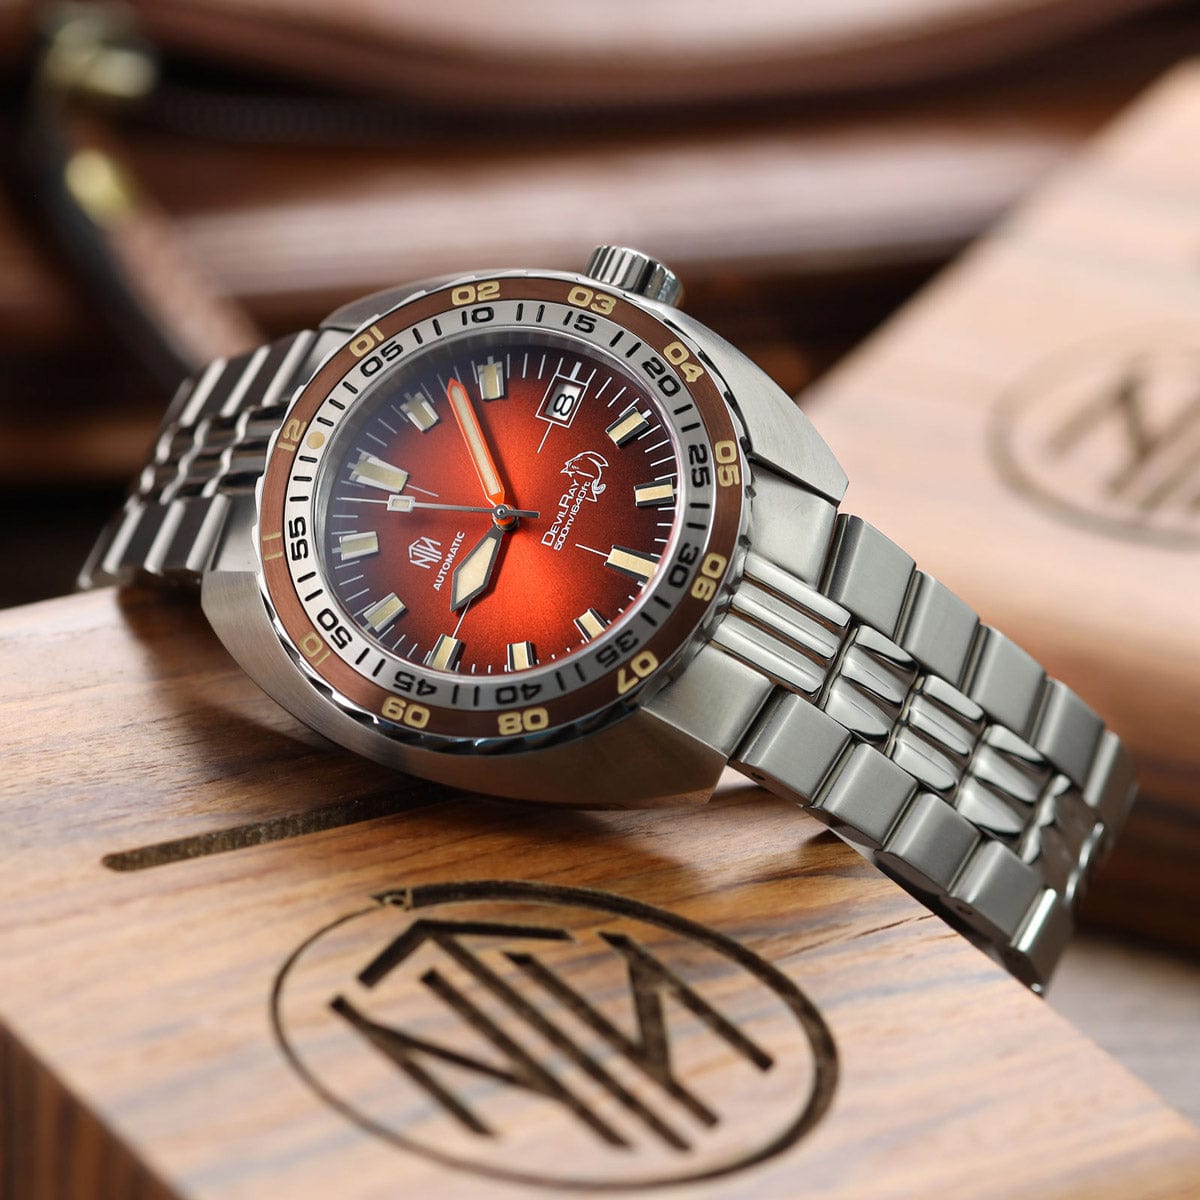 NTH and WatchGecko DevilRay Vintage Watches-nth-devilray-dive-watch-vintage-orange-watchgecko-exclusive-34686573740195_1200x